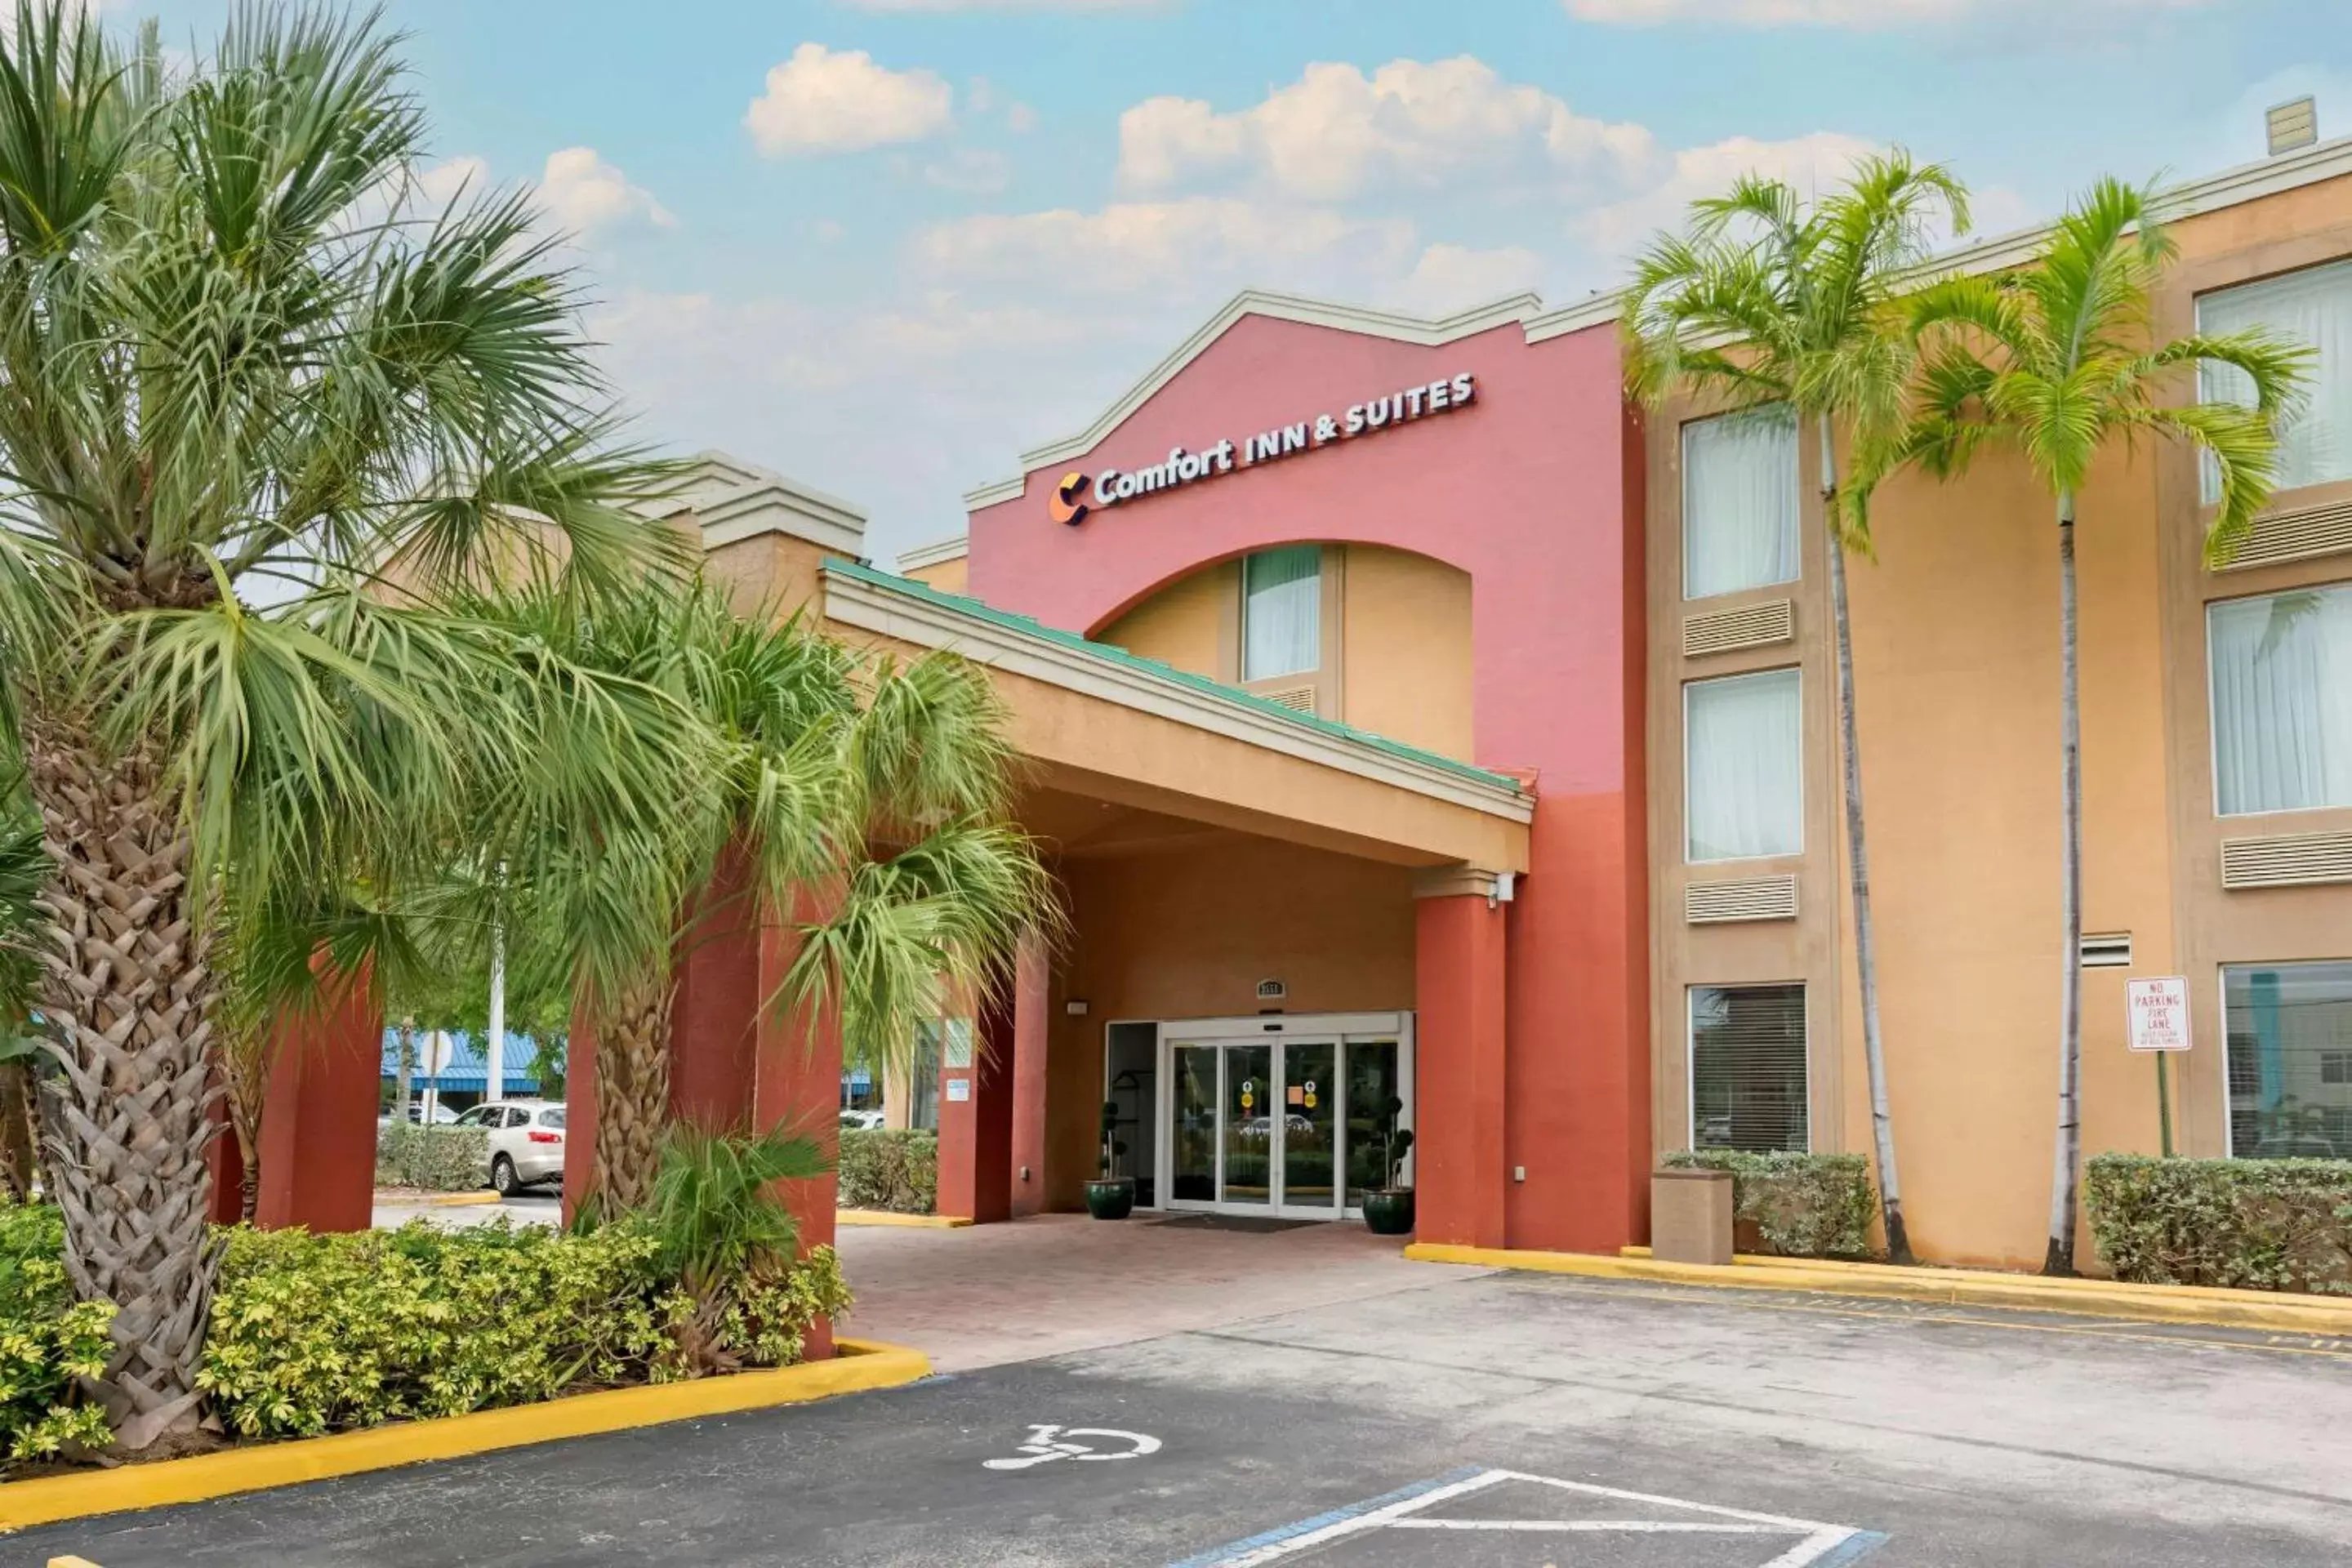 Property Building in Comfort Inn & Suites Fort Lauderdale West Turnpike